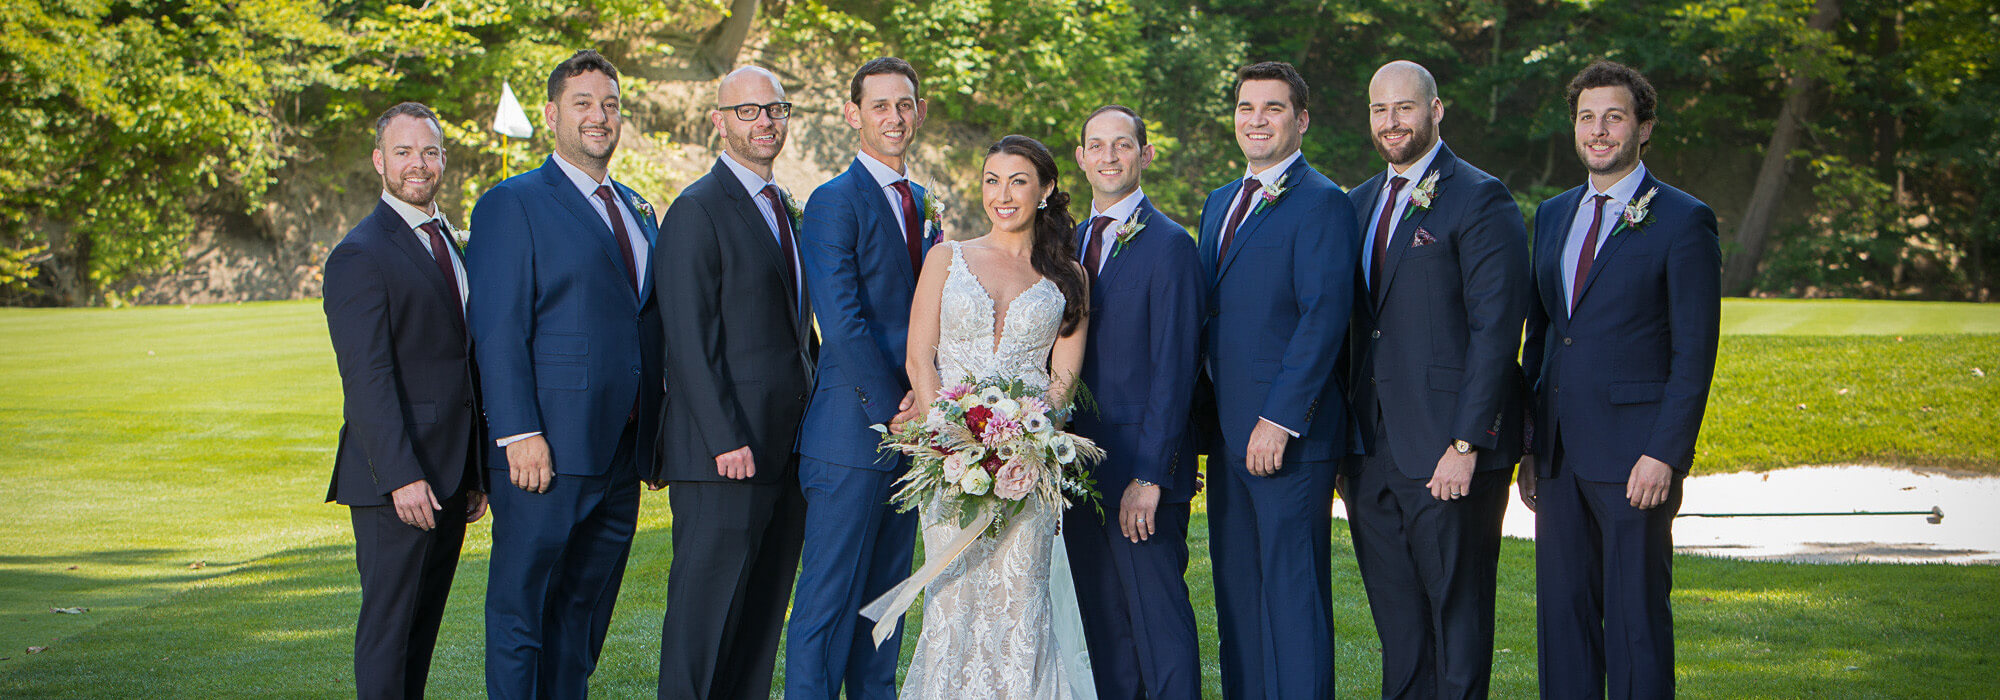 bridal party with groomsmen wearing custom suits